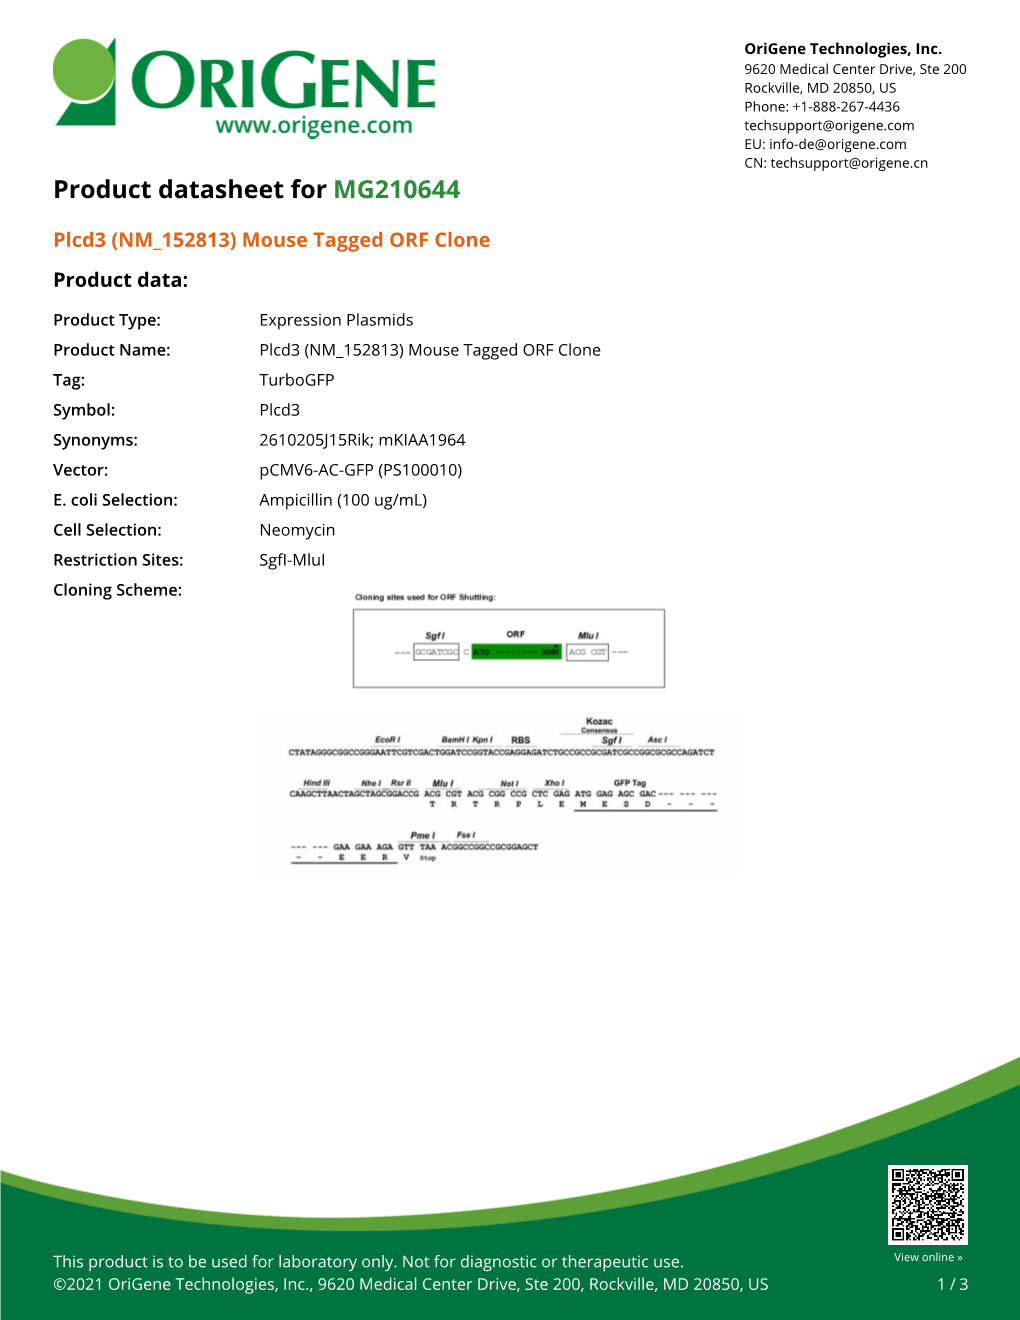 Plcd3 (NM 152813) Mouse Tagged ORF Clone Product Data